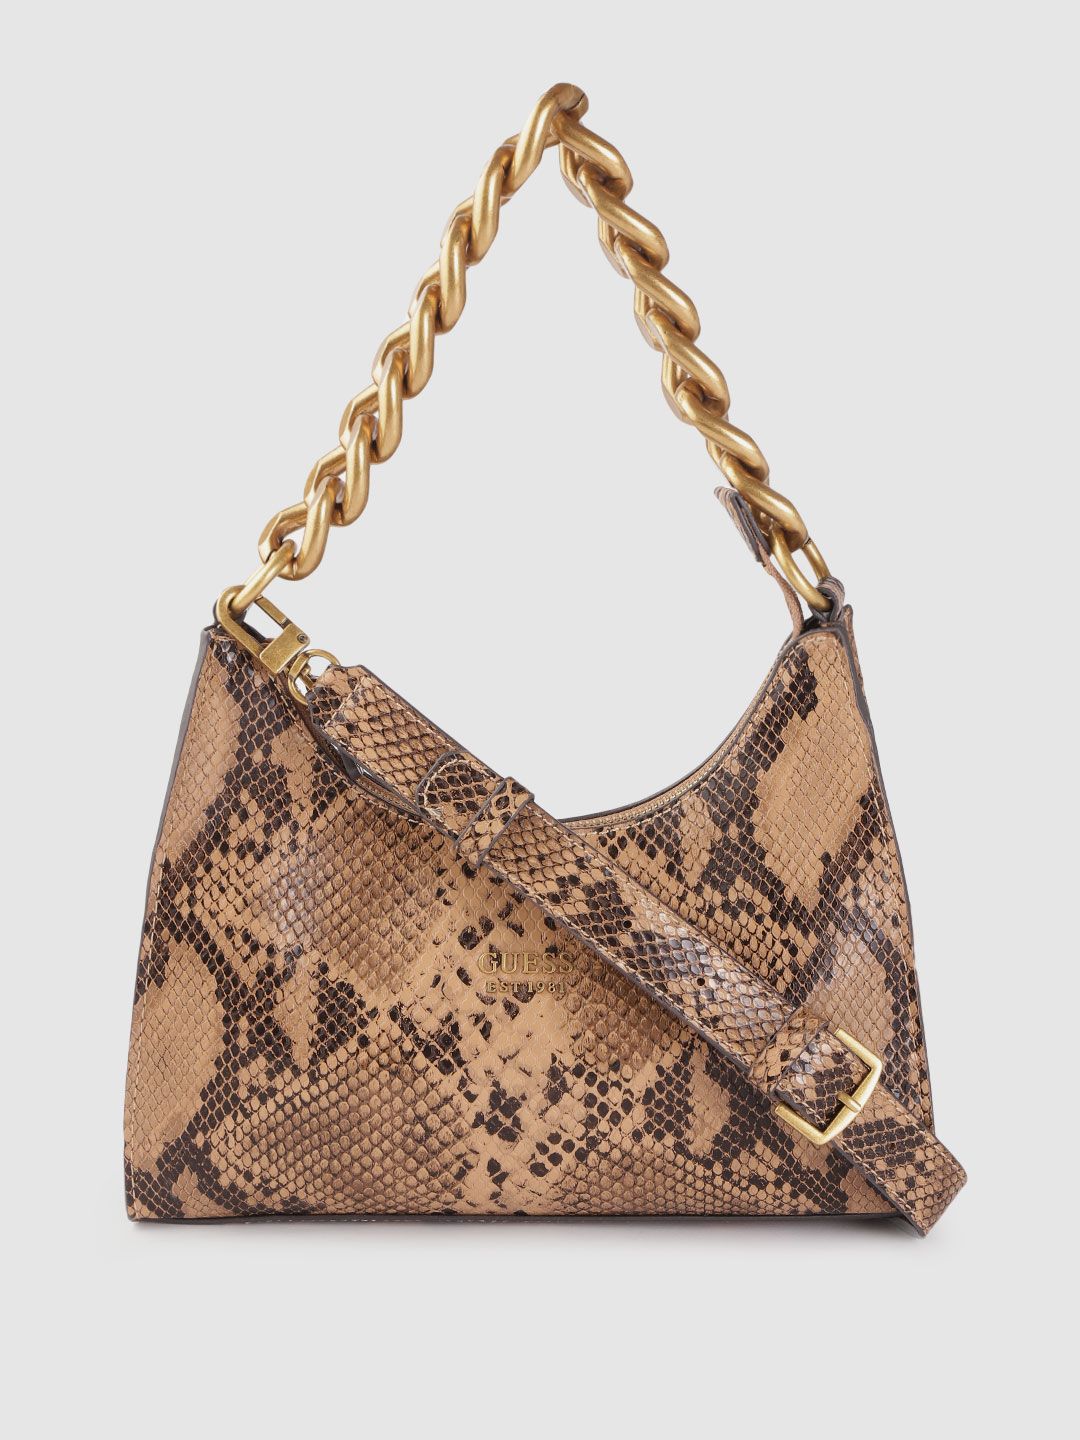 GUESS Beige & Coffee Brown Snakeskin Textured Hobo Bag with Detachable Sling Strap Price in India